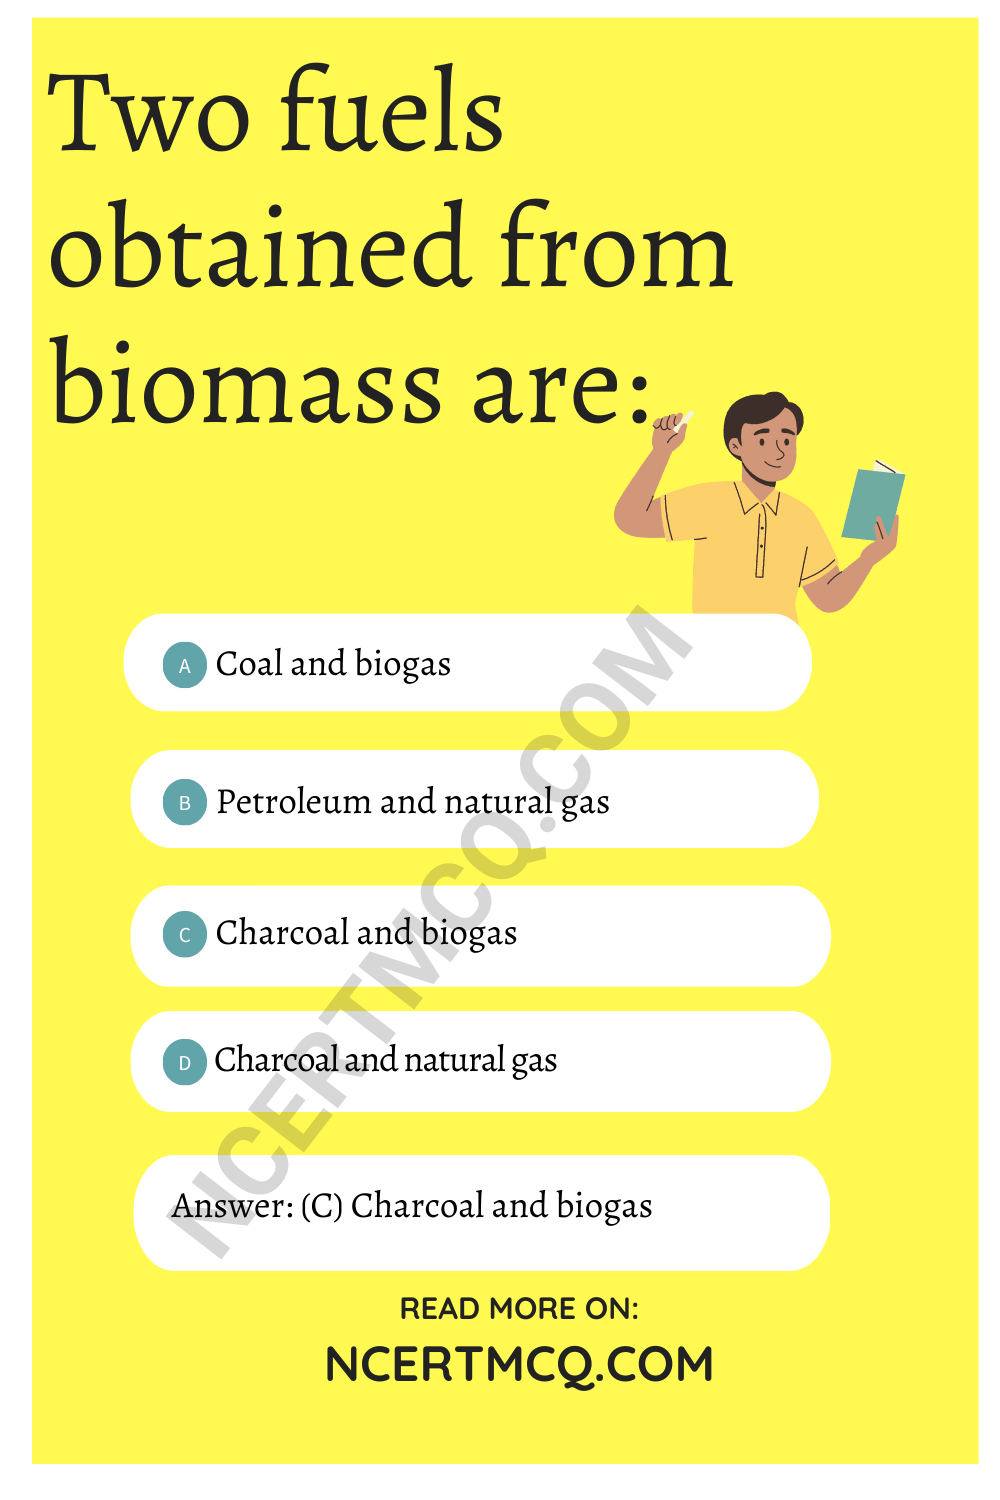 Two fuels obtained from biomass are: